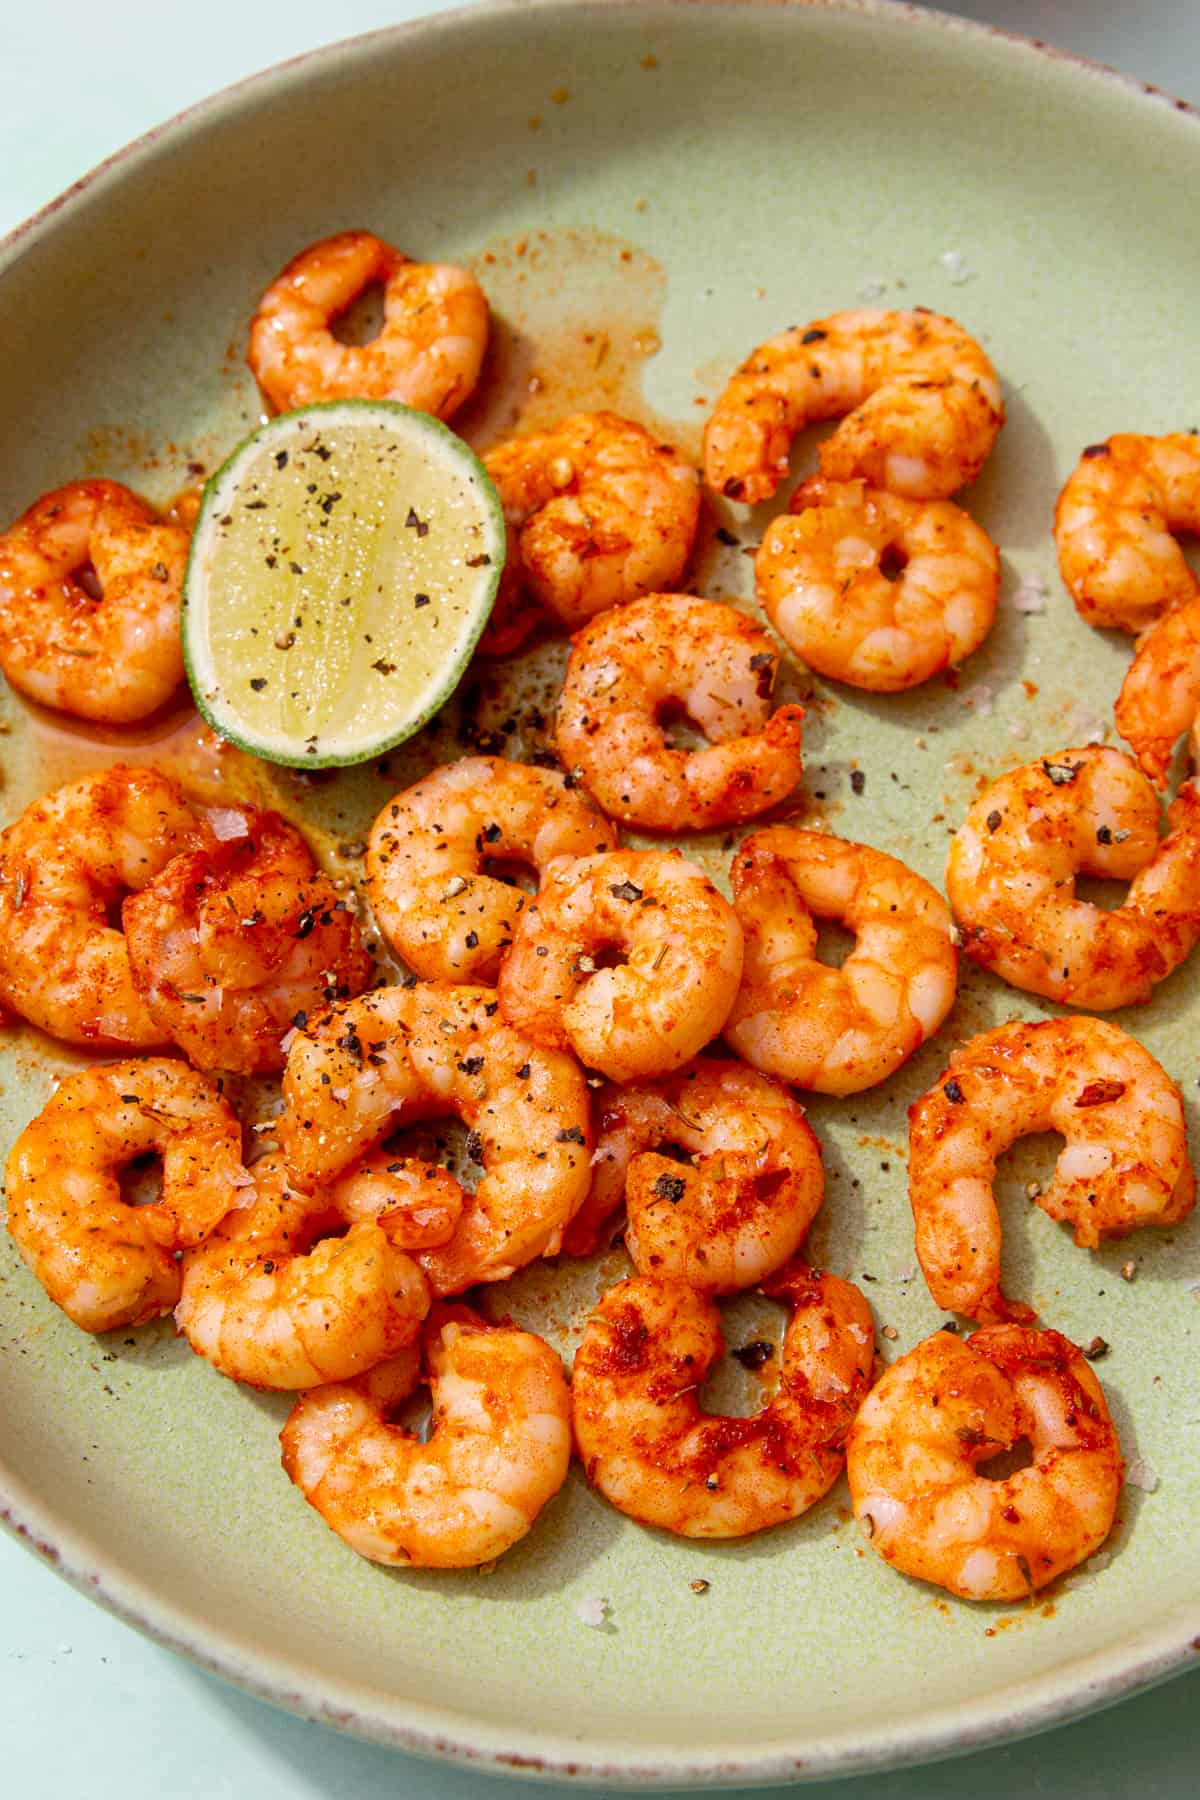 Seasoned King prawns in a bowl with half a lime wedge and topped with extra seasoning.